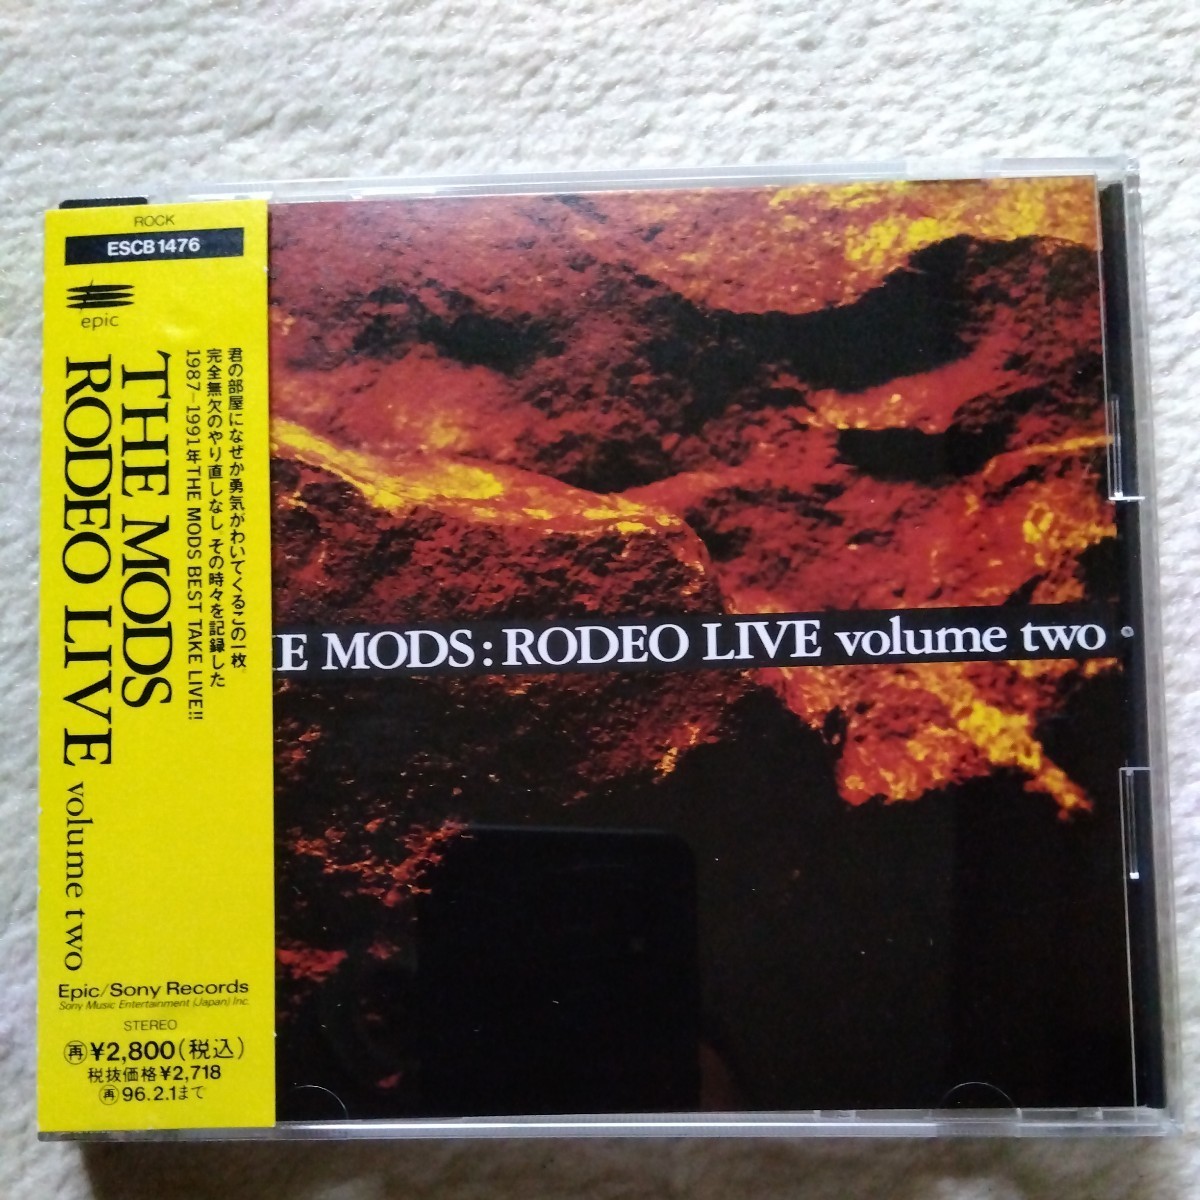 THE MODS RODEO LIVE volume two LIVE CD ESCB1476 ザモッズ_画像1